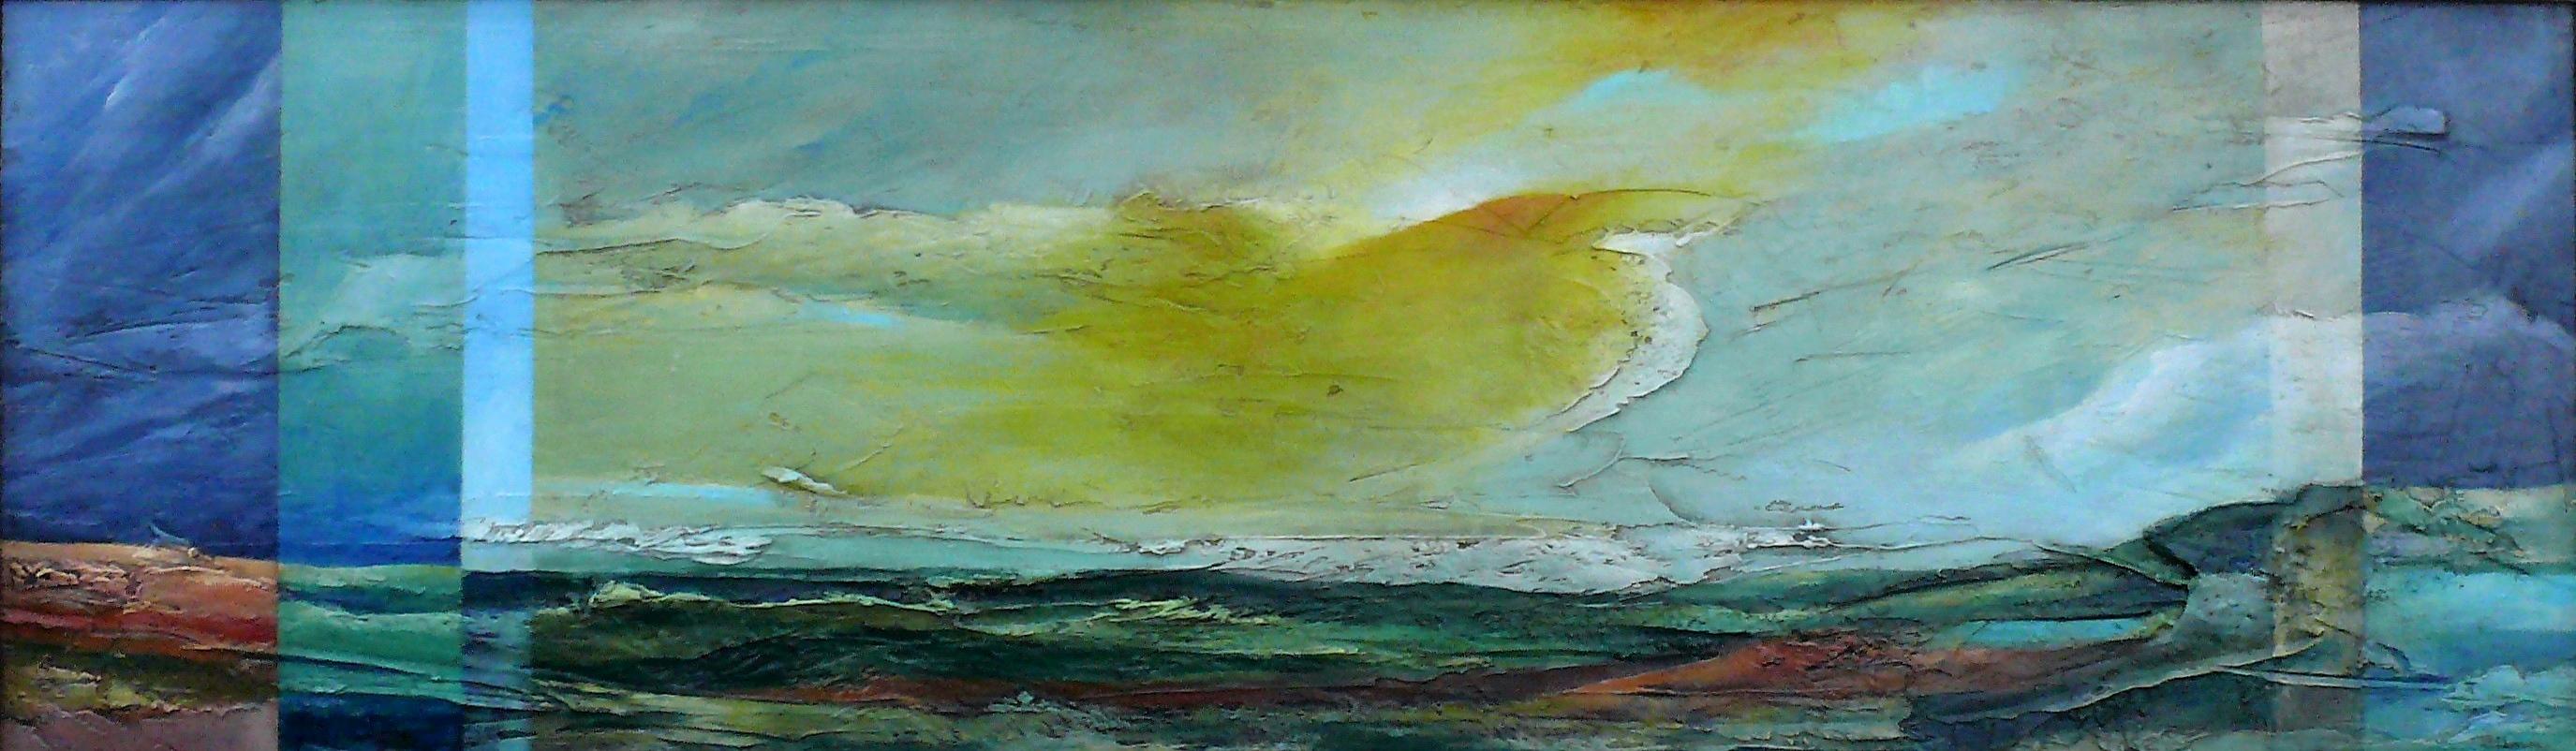 Restless Sky. Úbeda Modern fragmented into planes landscape. Yelow blue colors. - Painting by Ángel Luis Úbeda